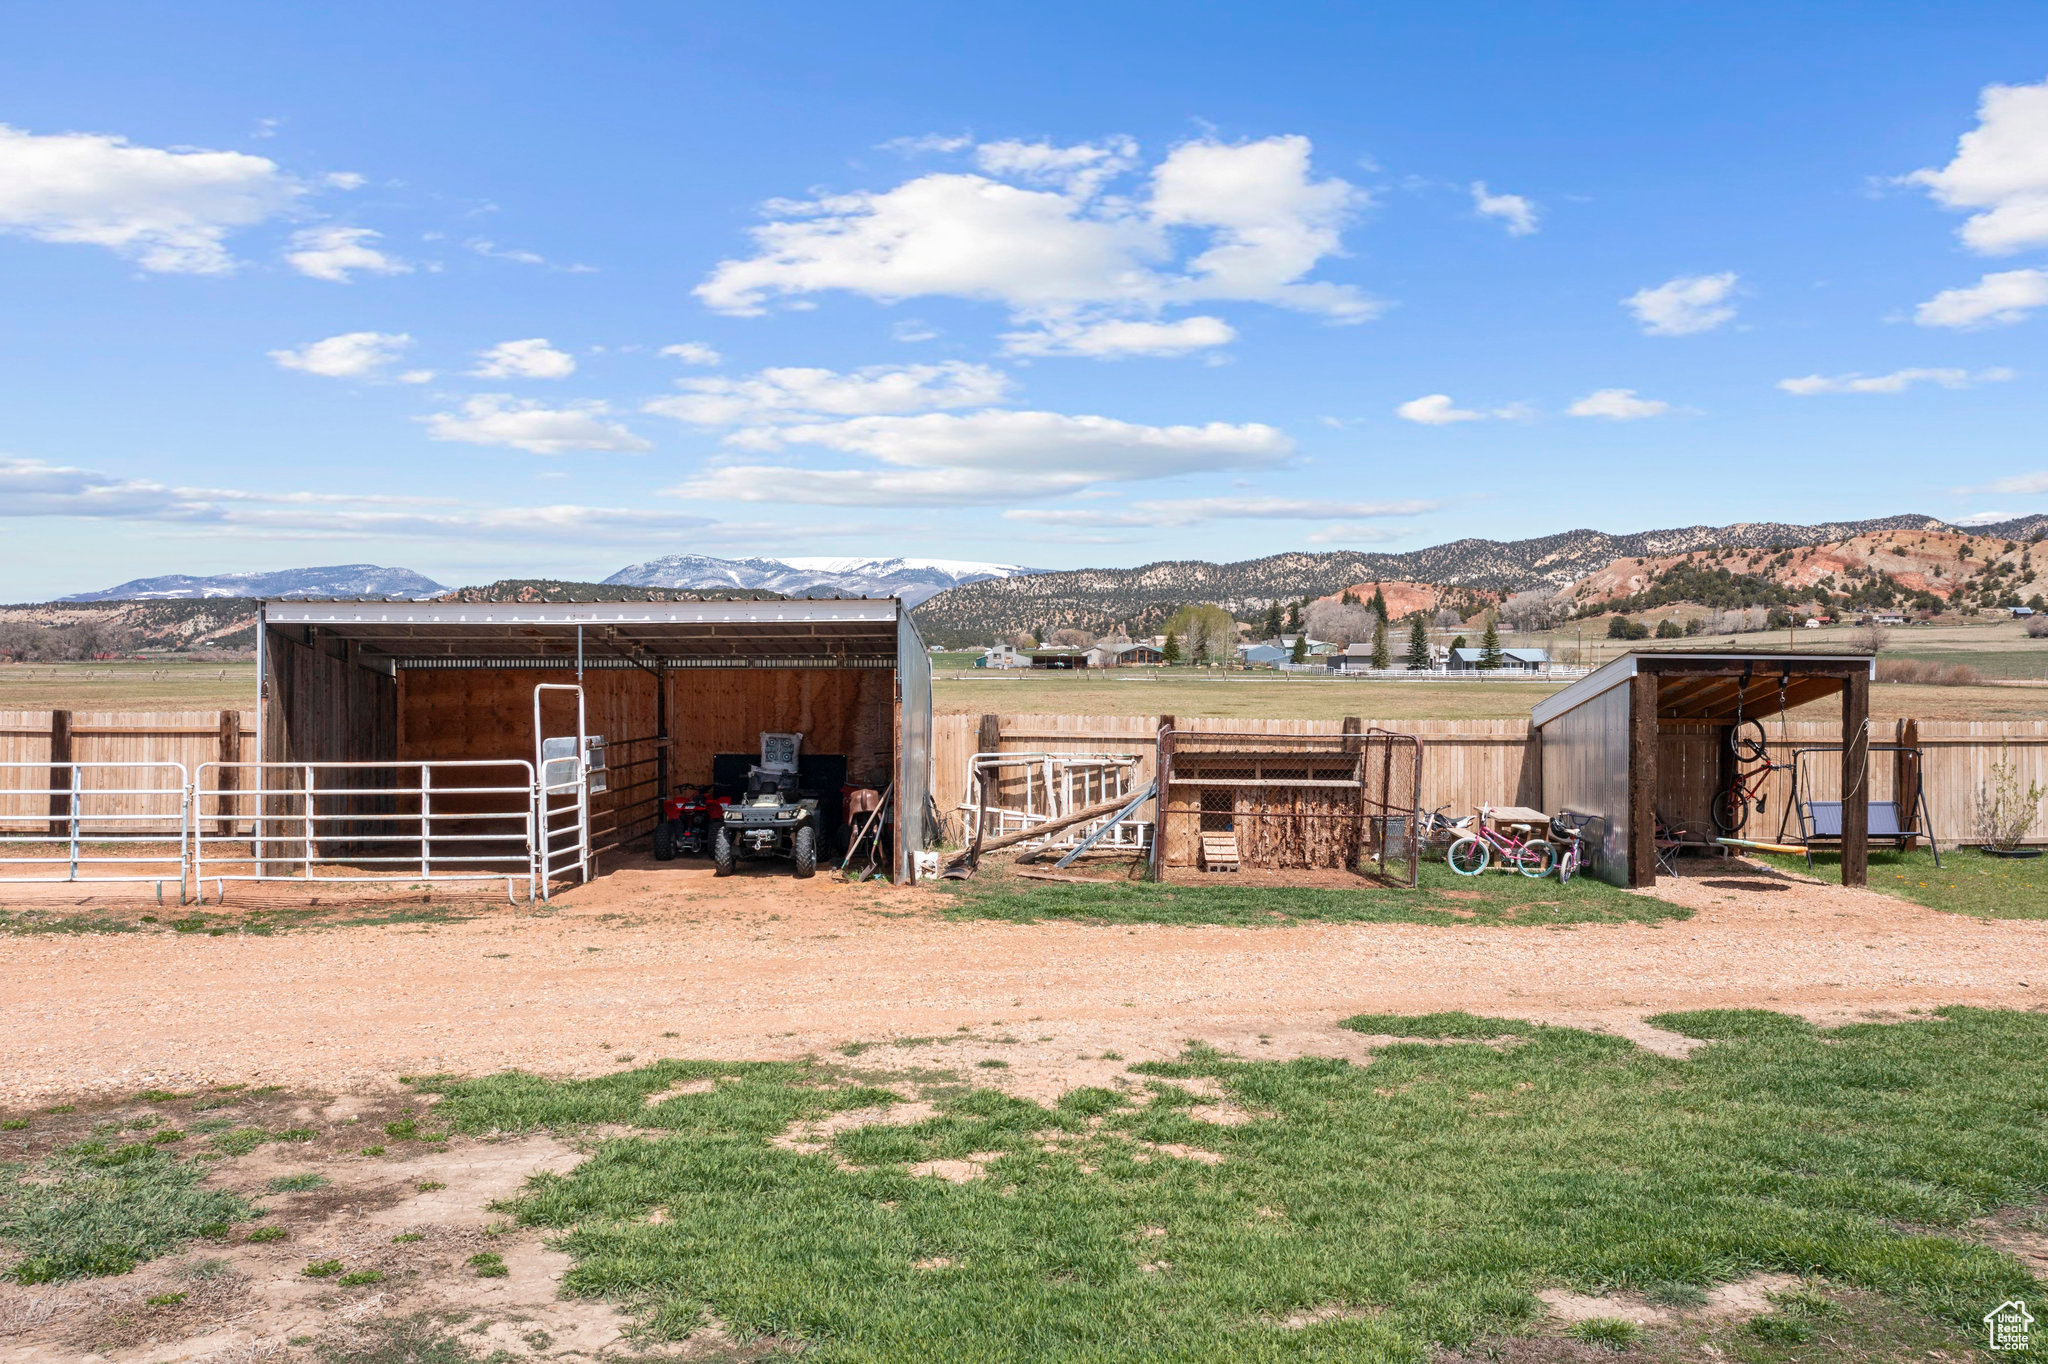 View of horse barn featuring a mountain view and an outdoor structure and chicken coop